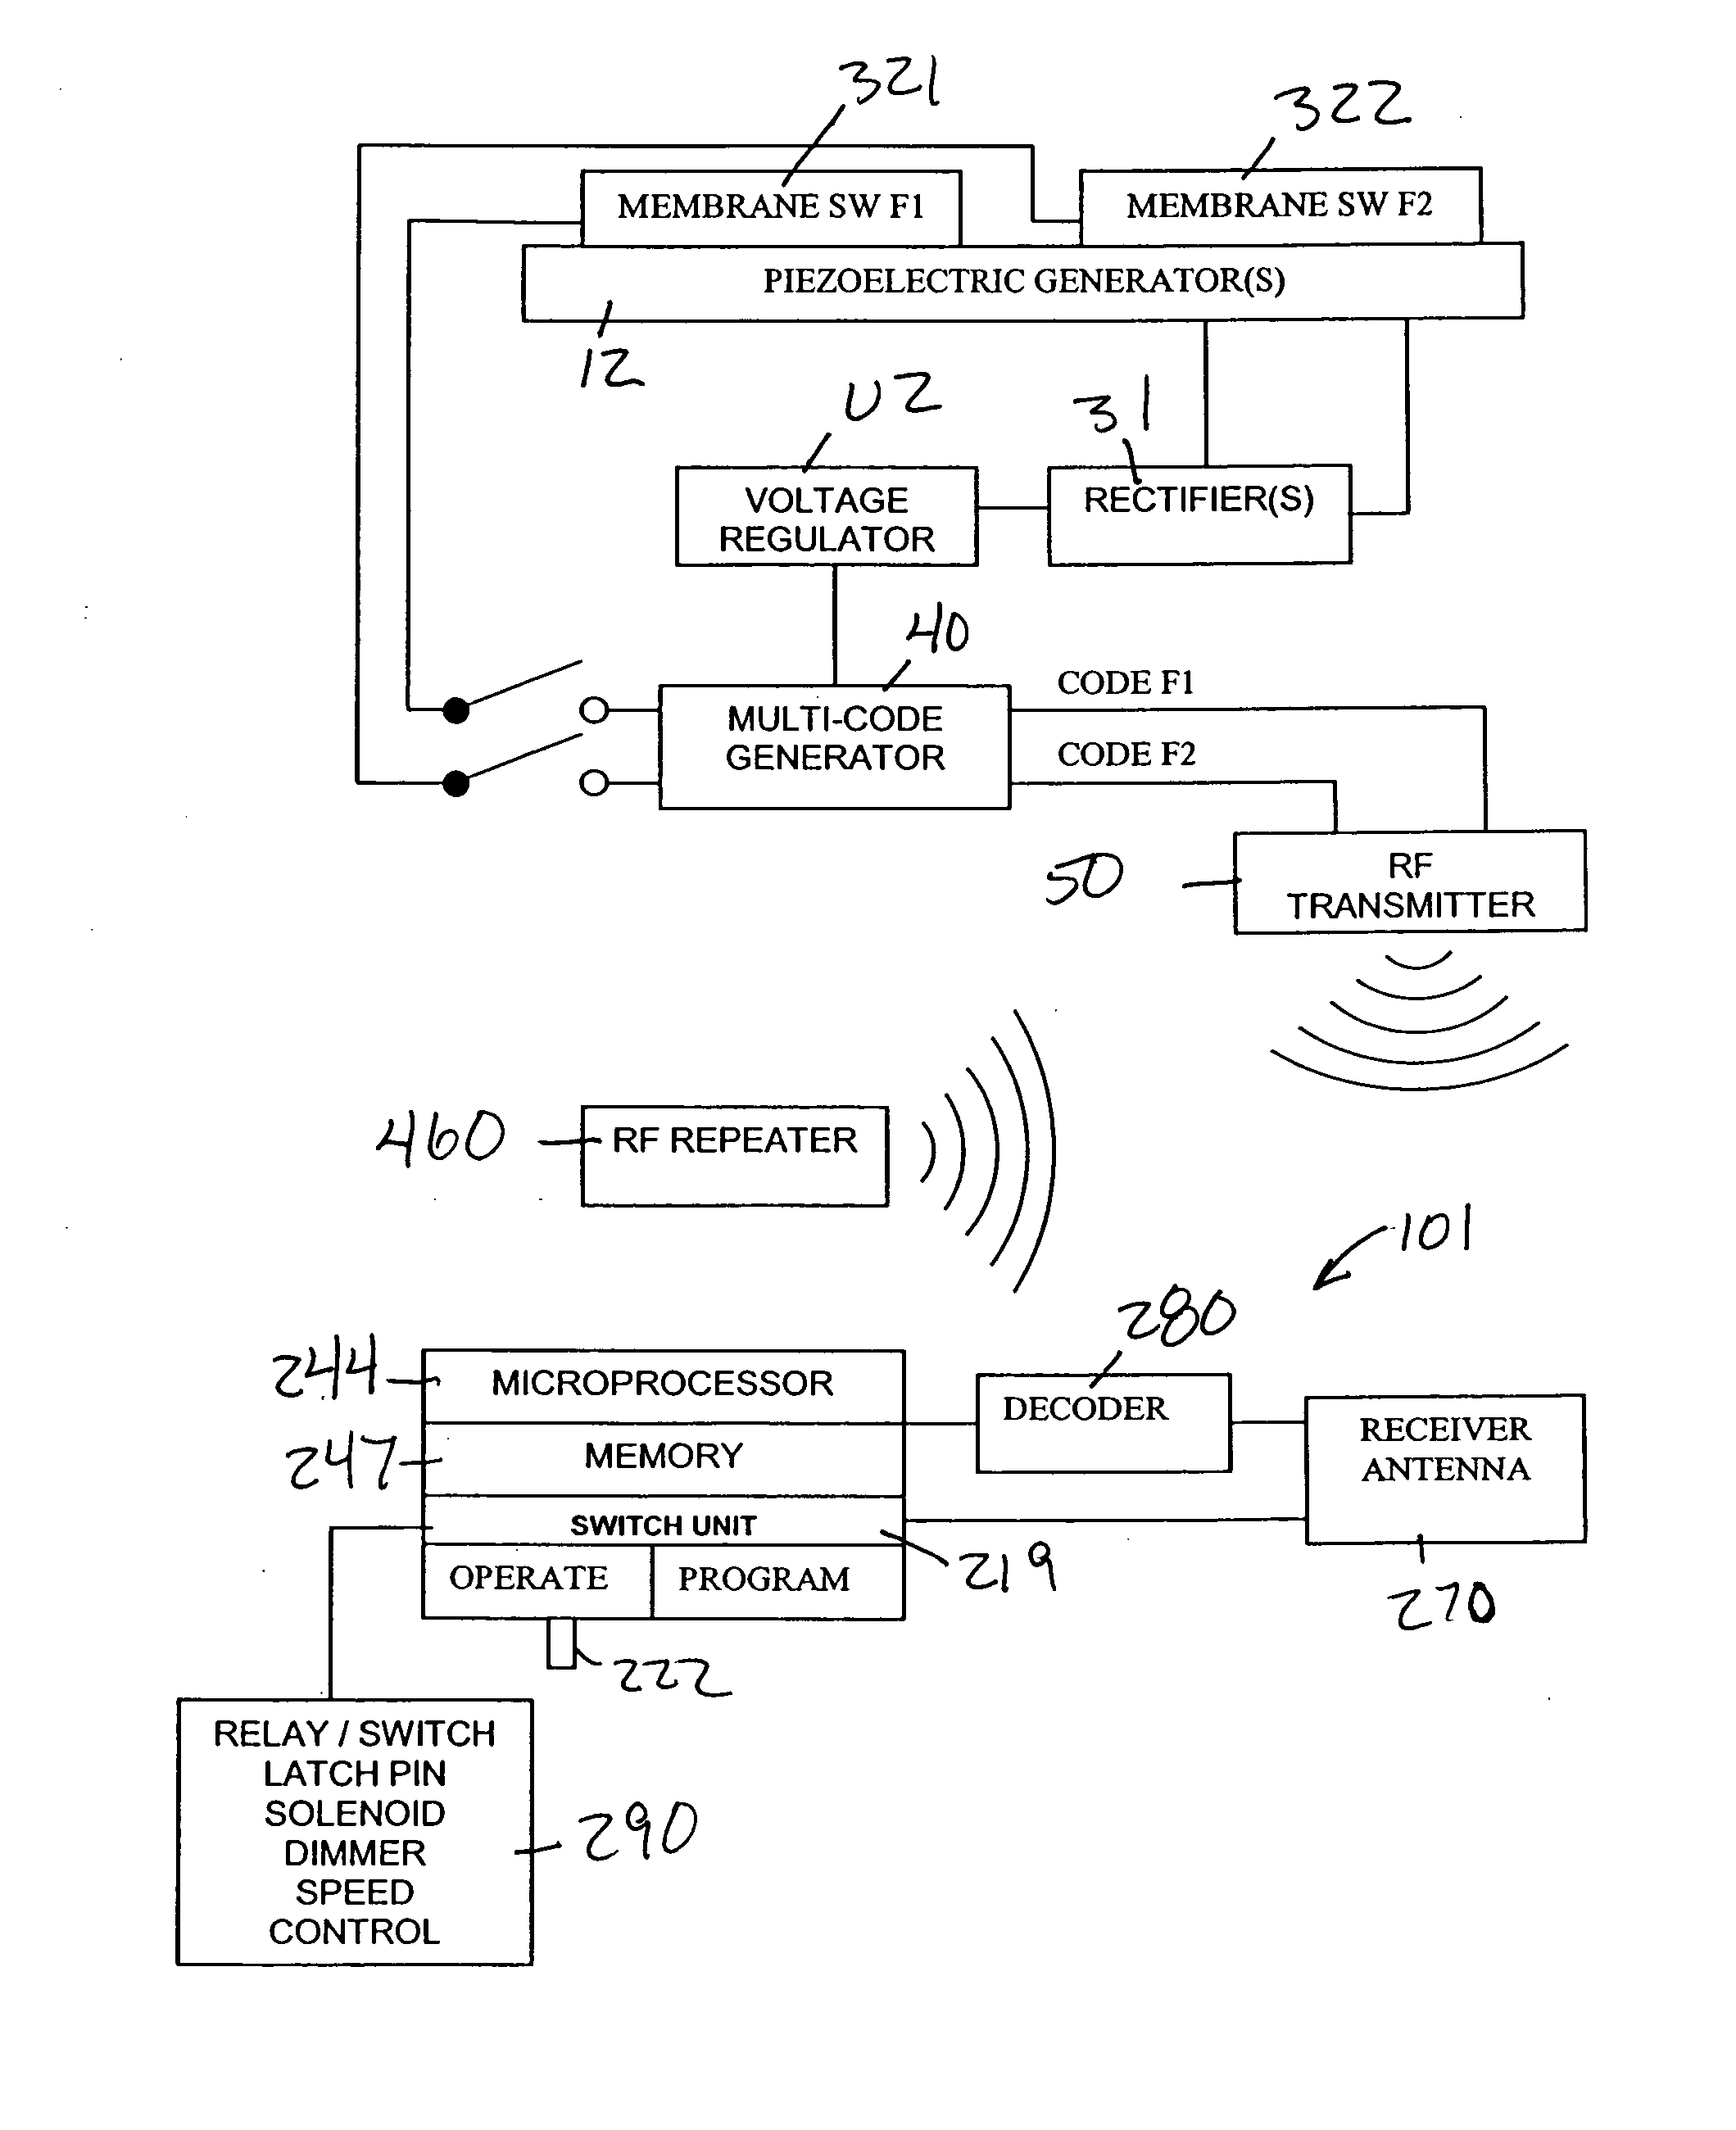 Lighting fixture with low voltage transformer and self-powered switching system